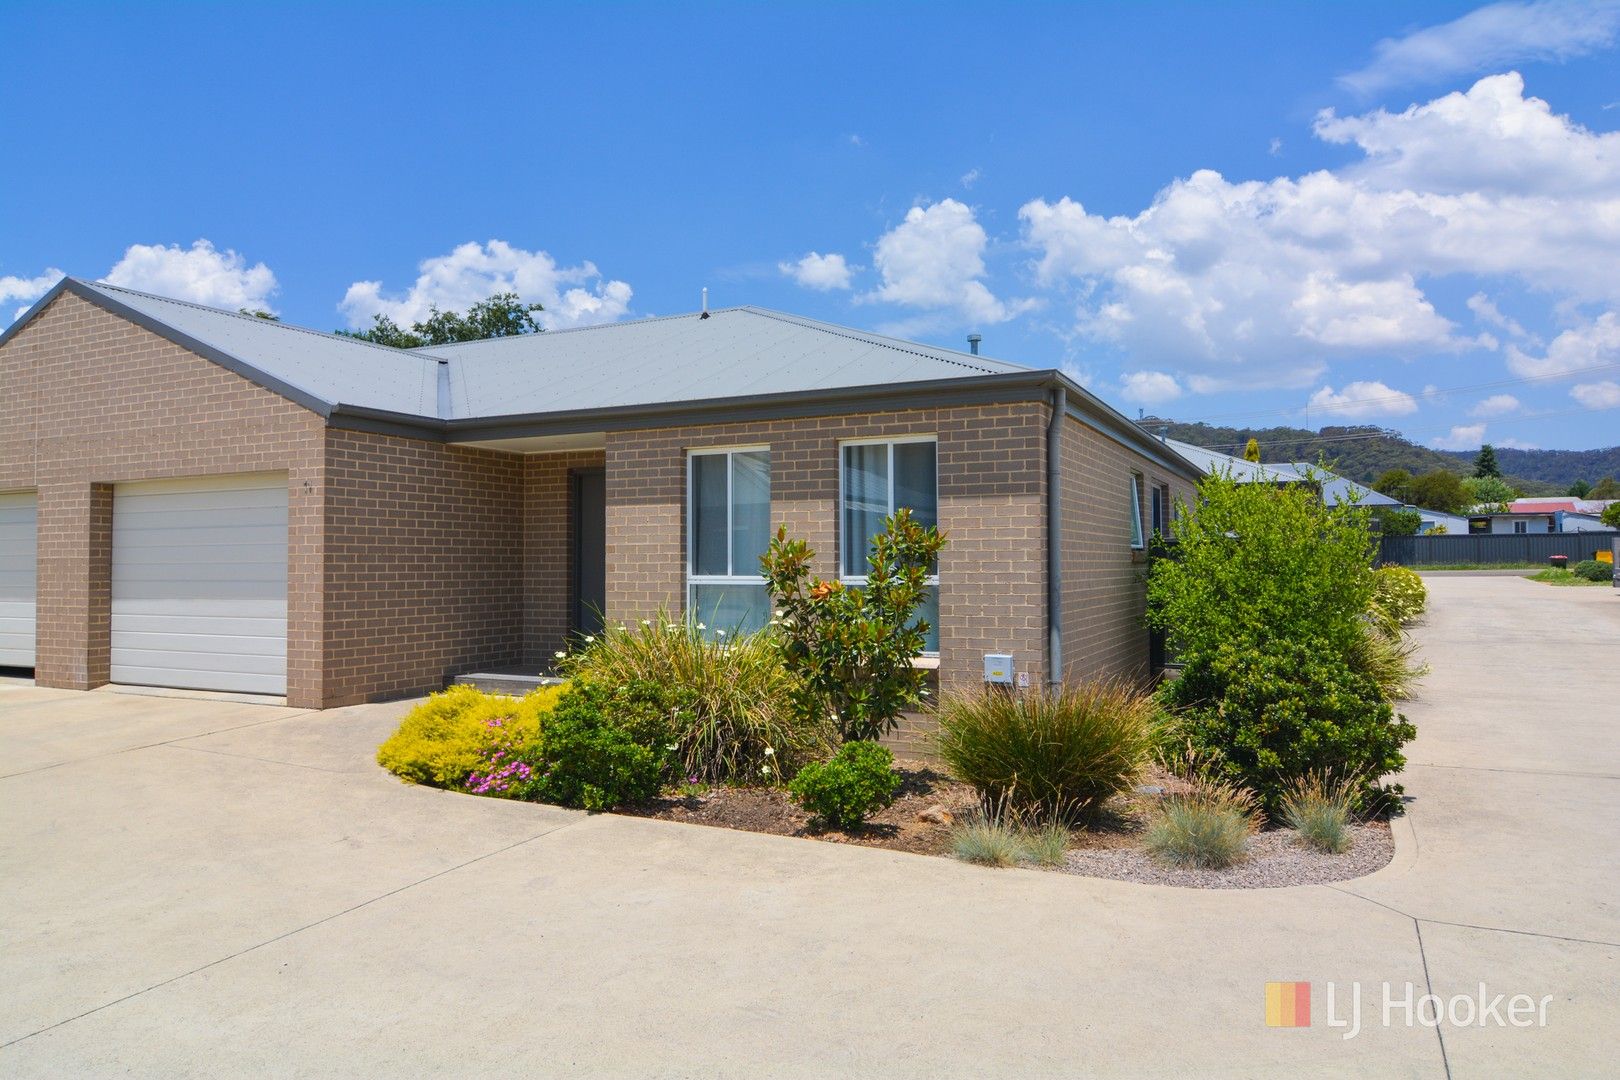 2 bedrooms Villa in 11/15 Hoskins Avenue LITHGOW NSW, 2790